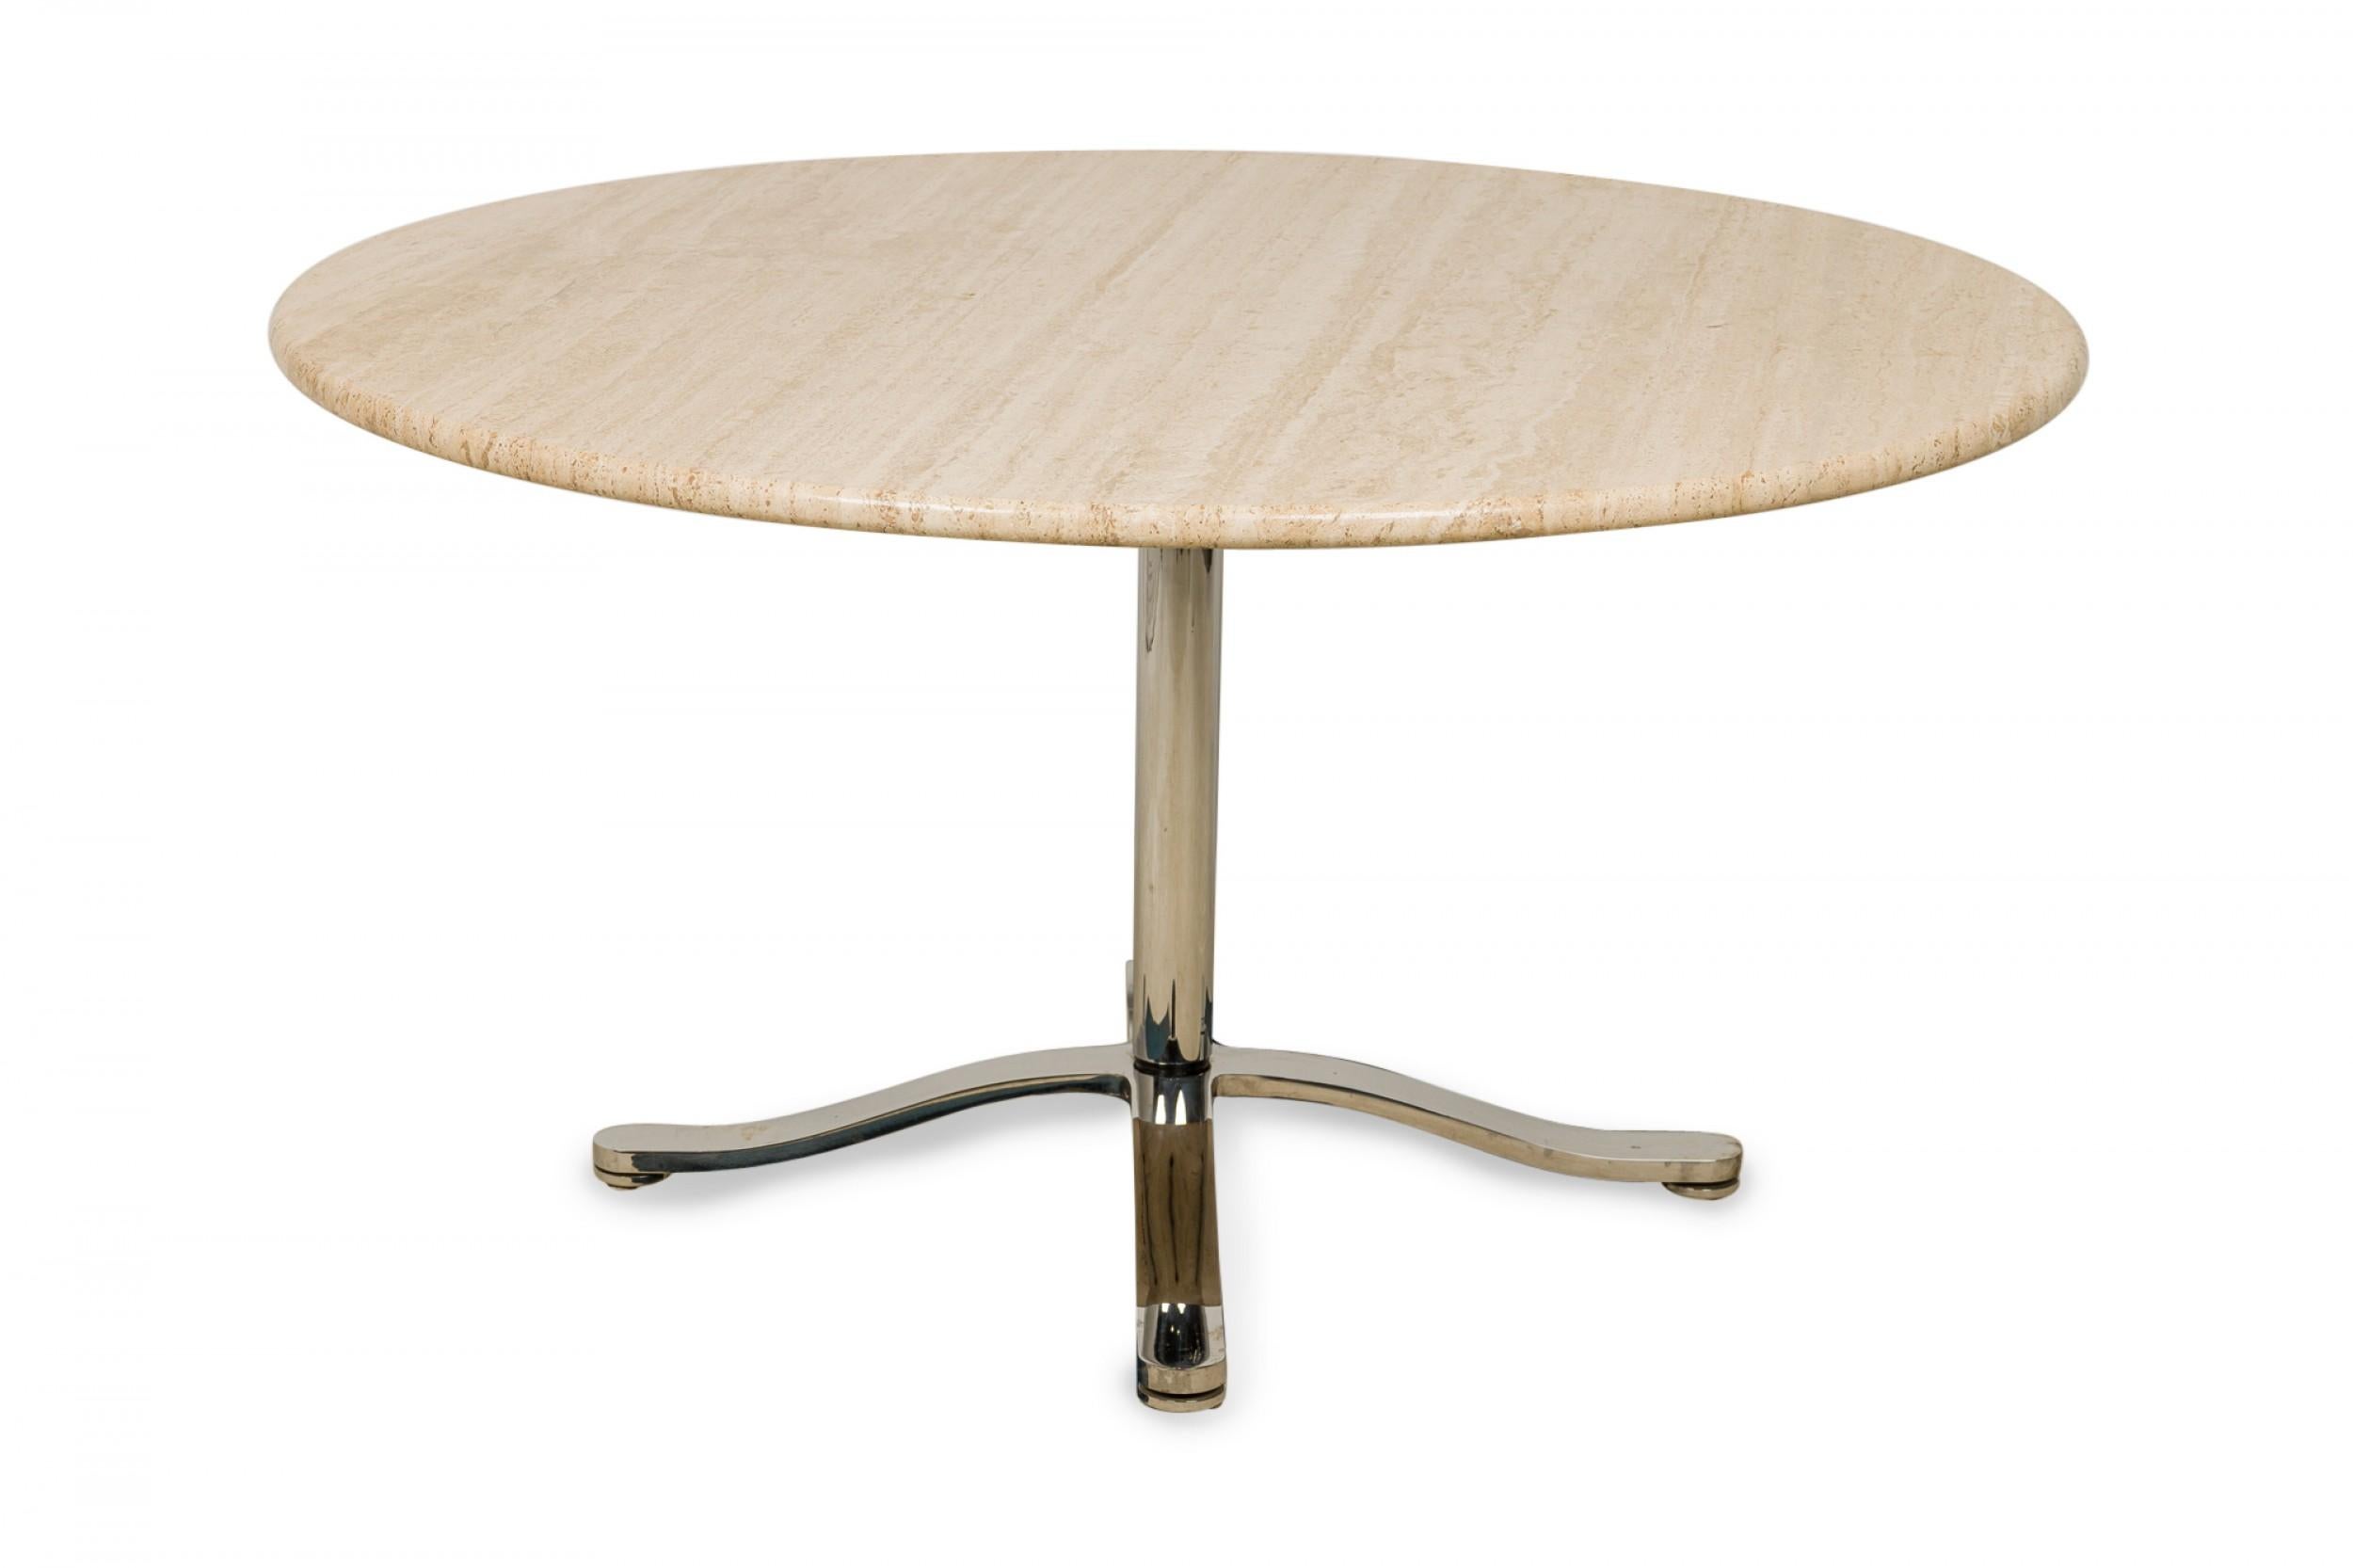 American Nicos Zographos Circular Travertine and Steel Dining Table For Sale